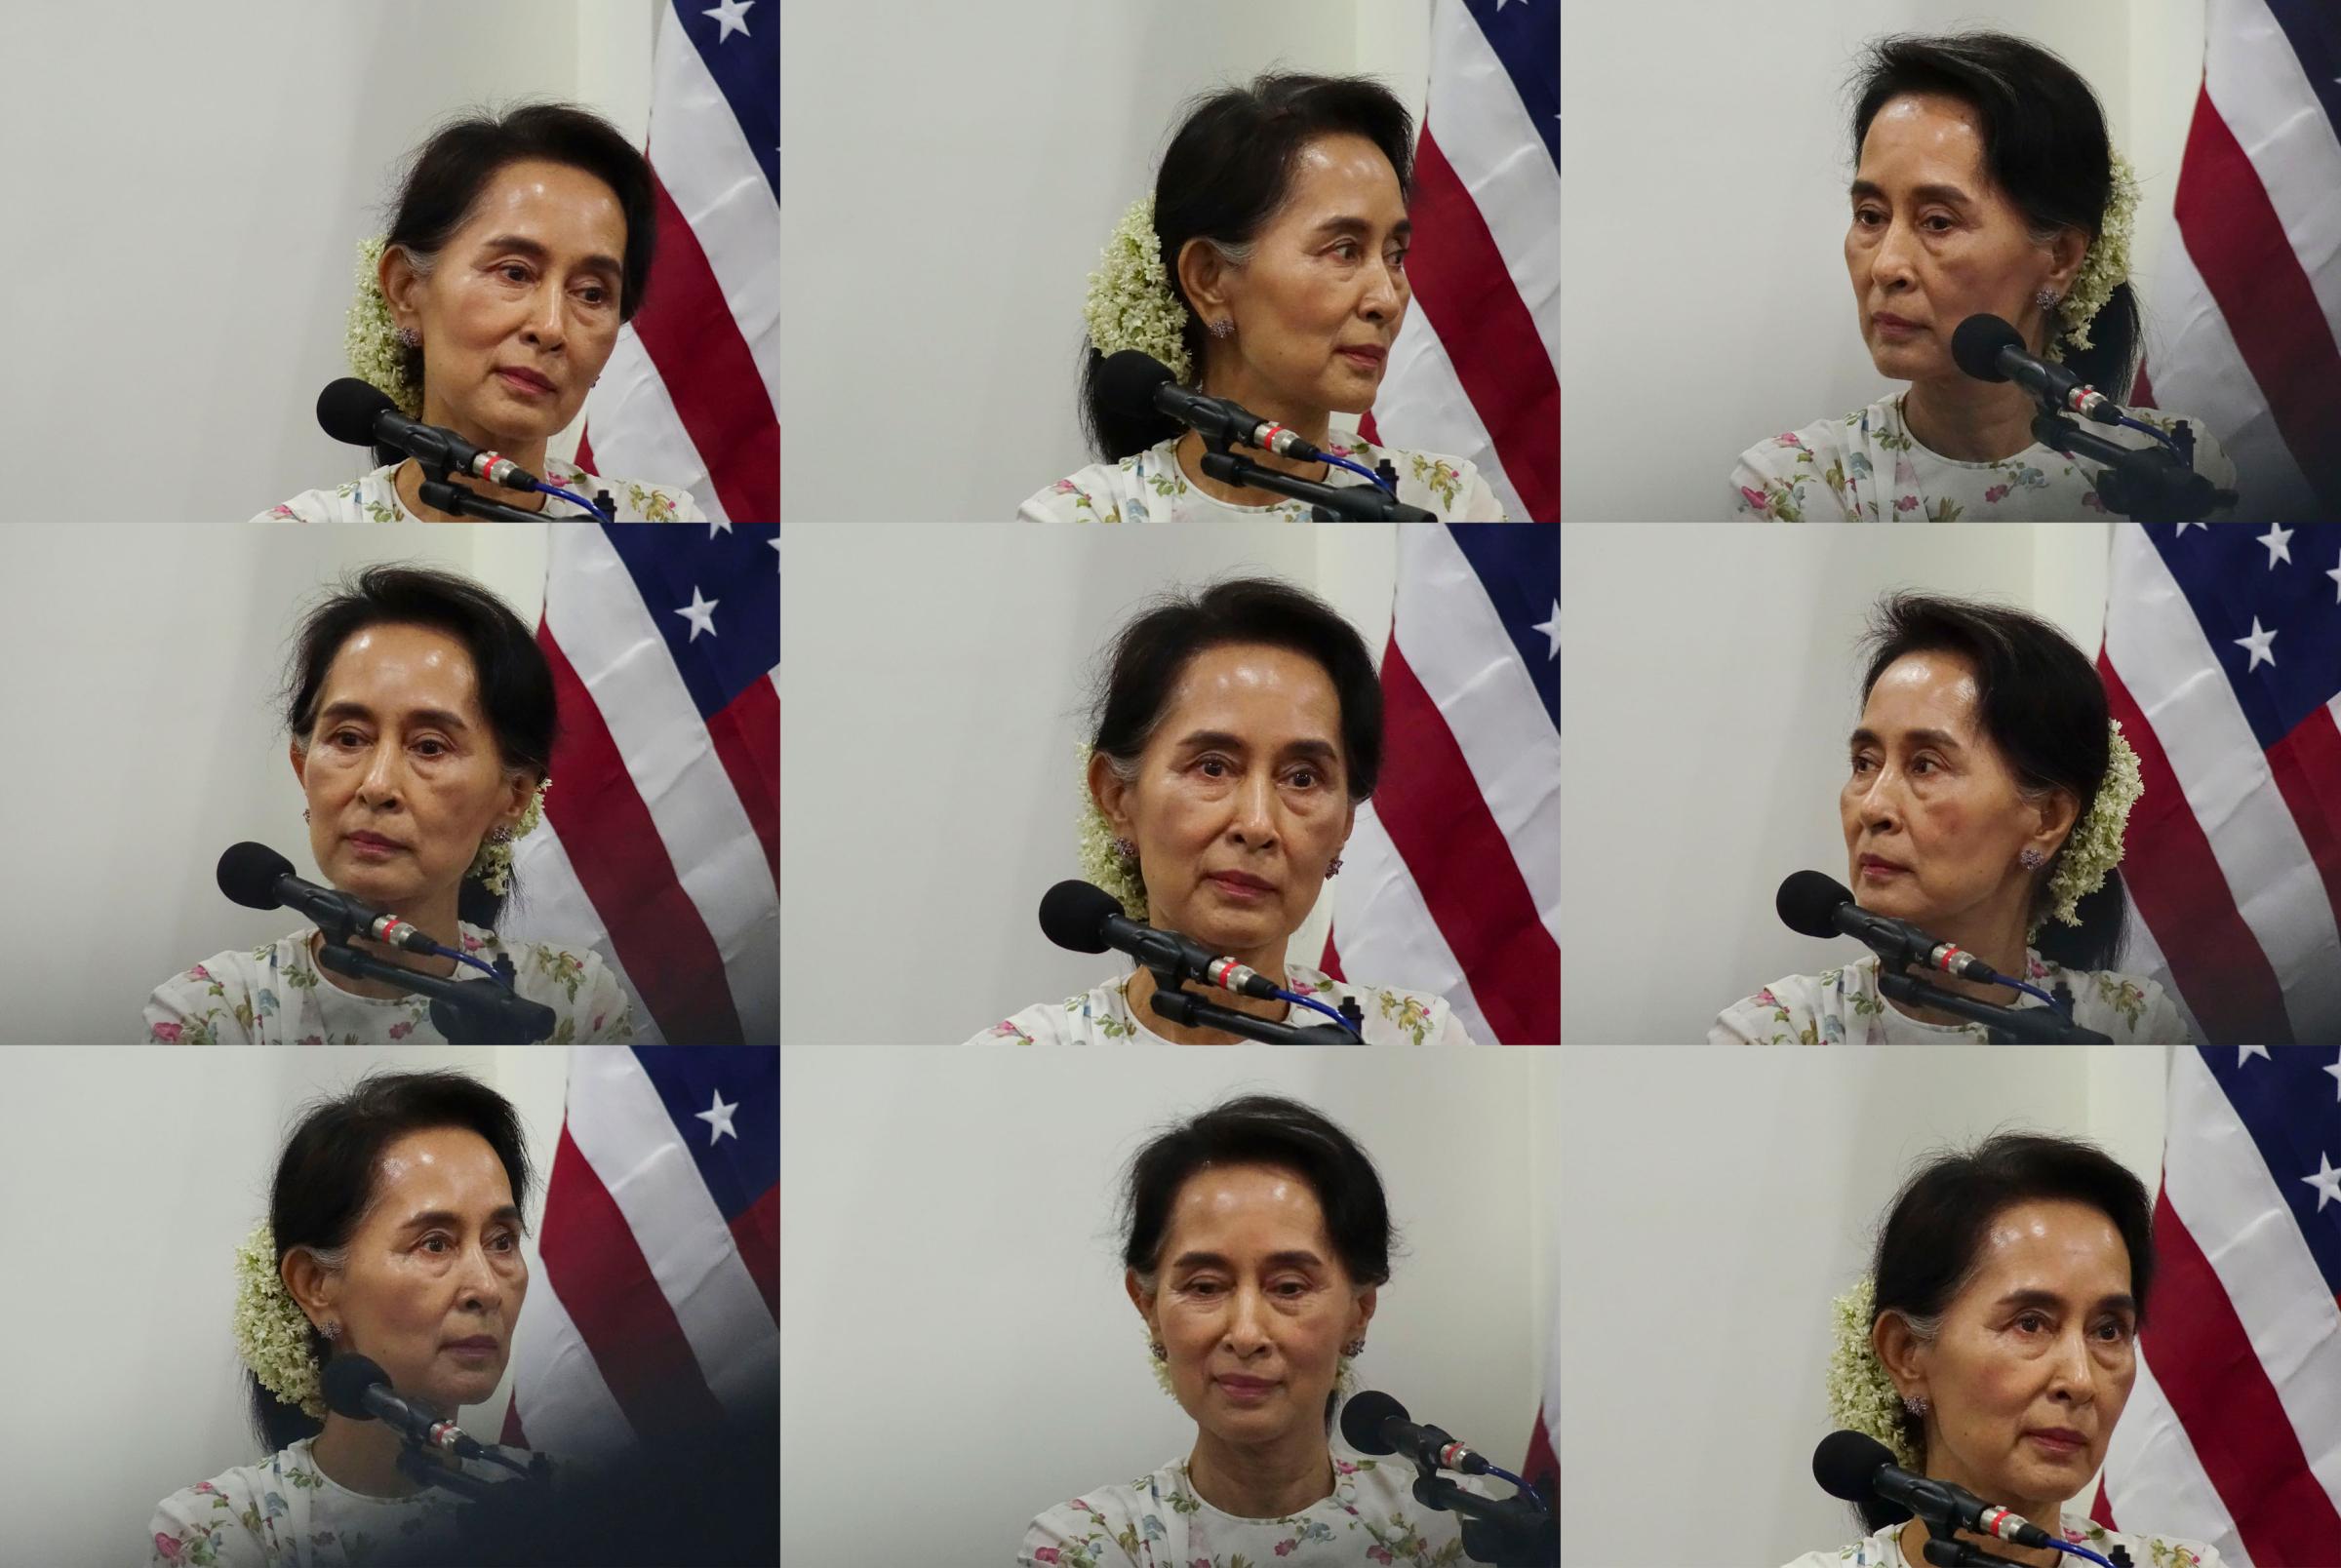 MYANMAR. Naypyidaw. June, 2016. Aung San Suu Kyi, Minister of Foreign Affairs and State Counselor  of Myanmar (Burma) holds a press conference with U.S. Secretary of State John Kerry.